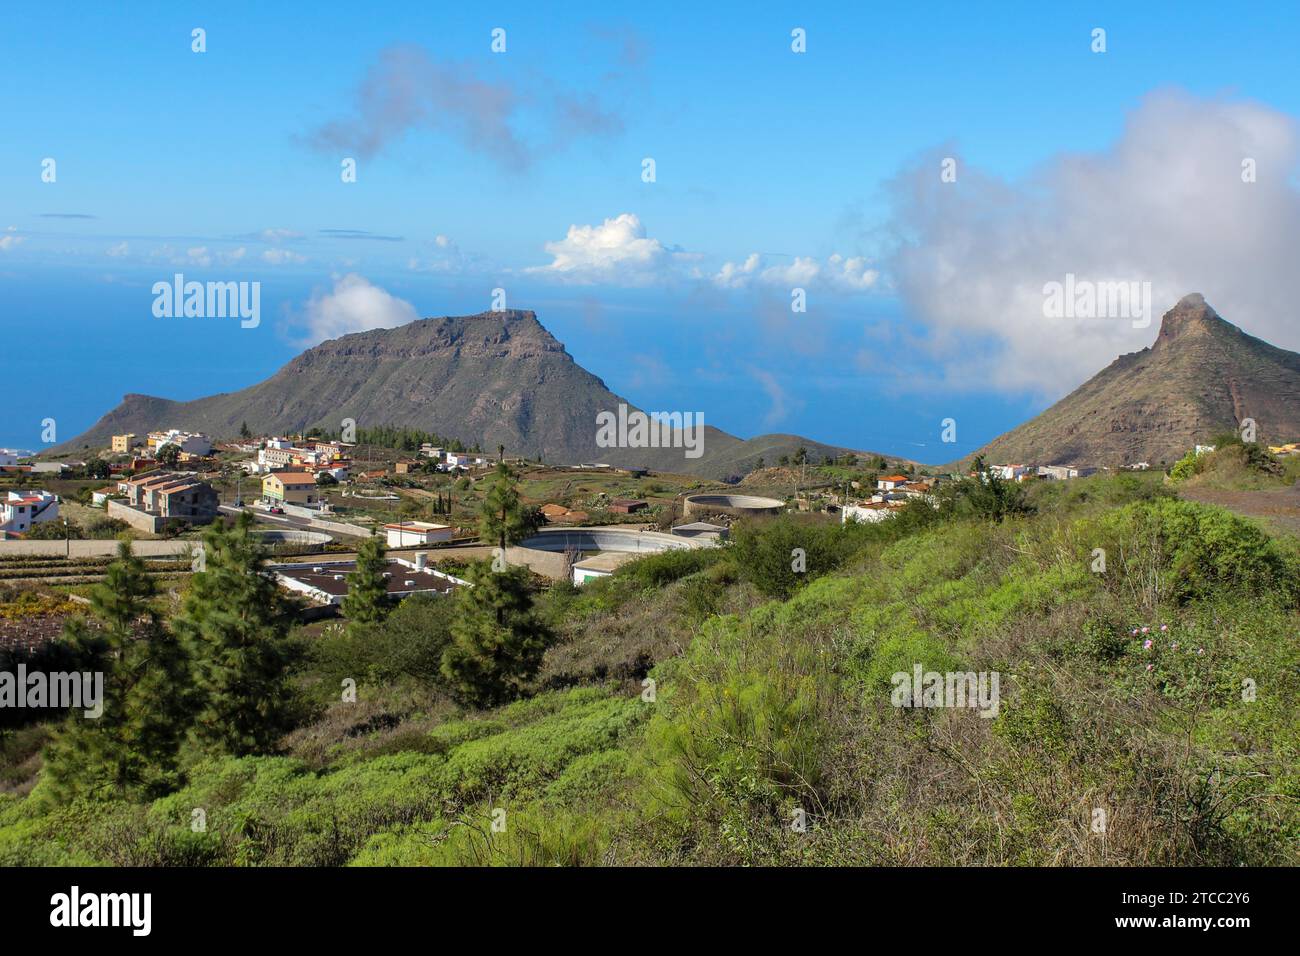 Landscape with green plants in the front, houses and mountains in background on Canary Island Tenerife Stock Photo